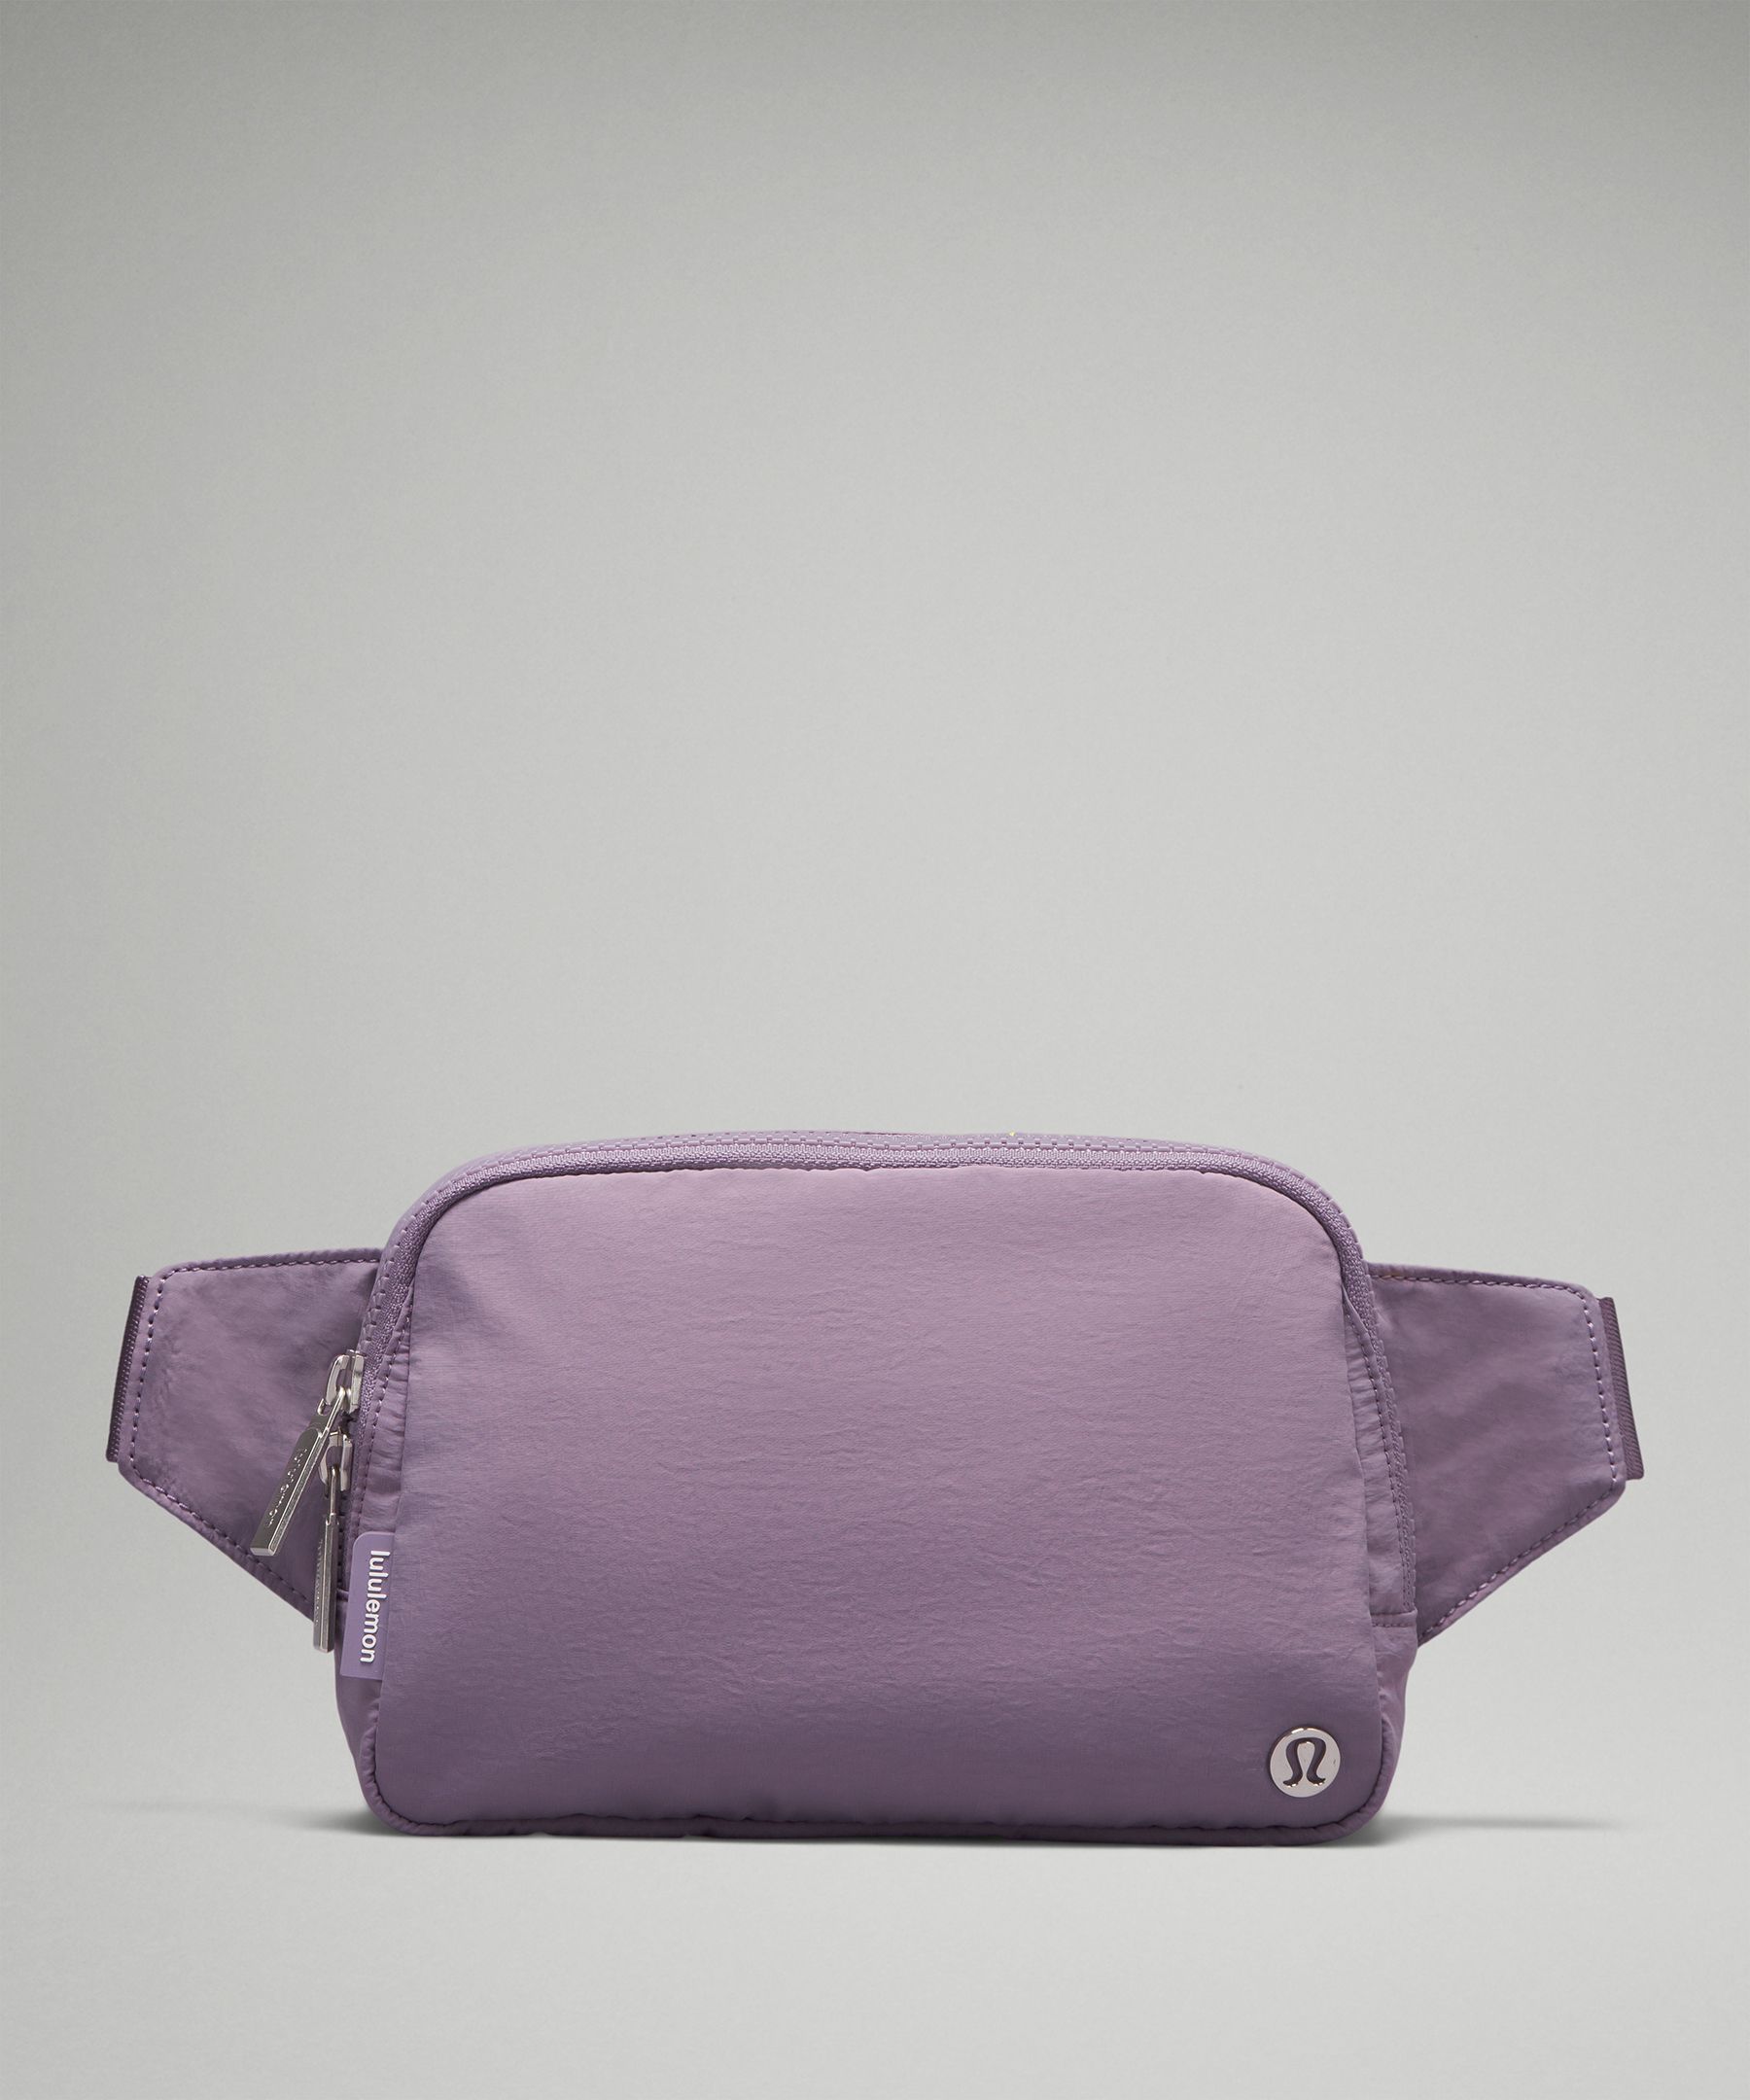 <p><strong>$48.00</strong></p><p><a href="https://go.redirectingat.com?id=74968X1553576&url=https%3A%2F%2Fshop.lululemon.com%2Fp%2Fbags%2FEverywhere-Belt-Bag-Large%2F_%2Fprod11130156&sref=https%3A%2F%2Fwww.womenshealthmag.com%2Fstyle%2Fg45379590%2Fbest-crossbody-bags-for-travel%2F">Shop Now</a></p><p>The Everywhere Belt Bag from Lululemon is probably the world's most popular waist pack. At one point in time it was sold out everywhere and up even up charged on resale sites! </p><p>Aside from the household brand name it holds, this belt bag (to be worn across your body) will make your life so much easier. It's simple, but made with water-repellent fabric that will keep your phone, keys, wallet and more safe and dry. It's casual and perfect for daily walks whether you're in activewear or weekend wear. </p><p><strong><em>Read more: <a href="https://www.womenshealthmag.com/fitness/a19964726/gym-bags/">Best Gym Bags</a></em></strong></p>